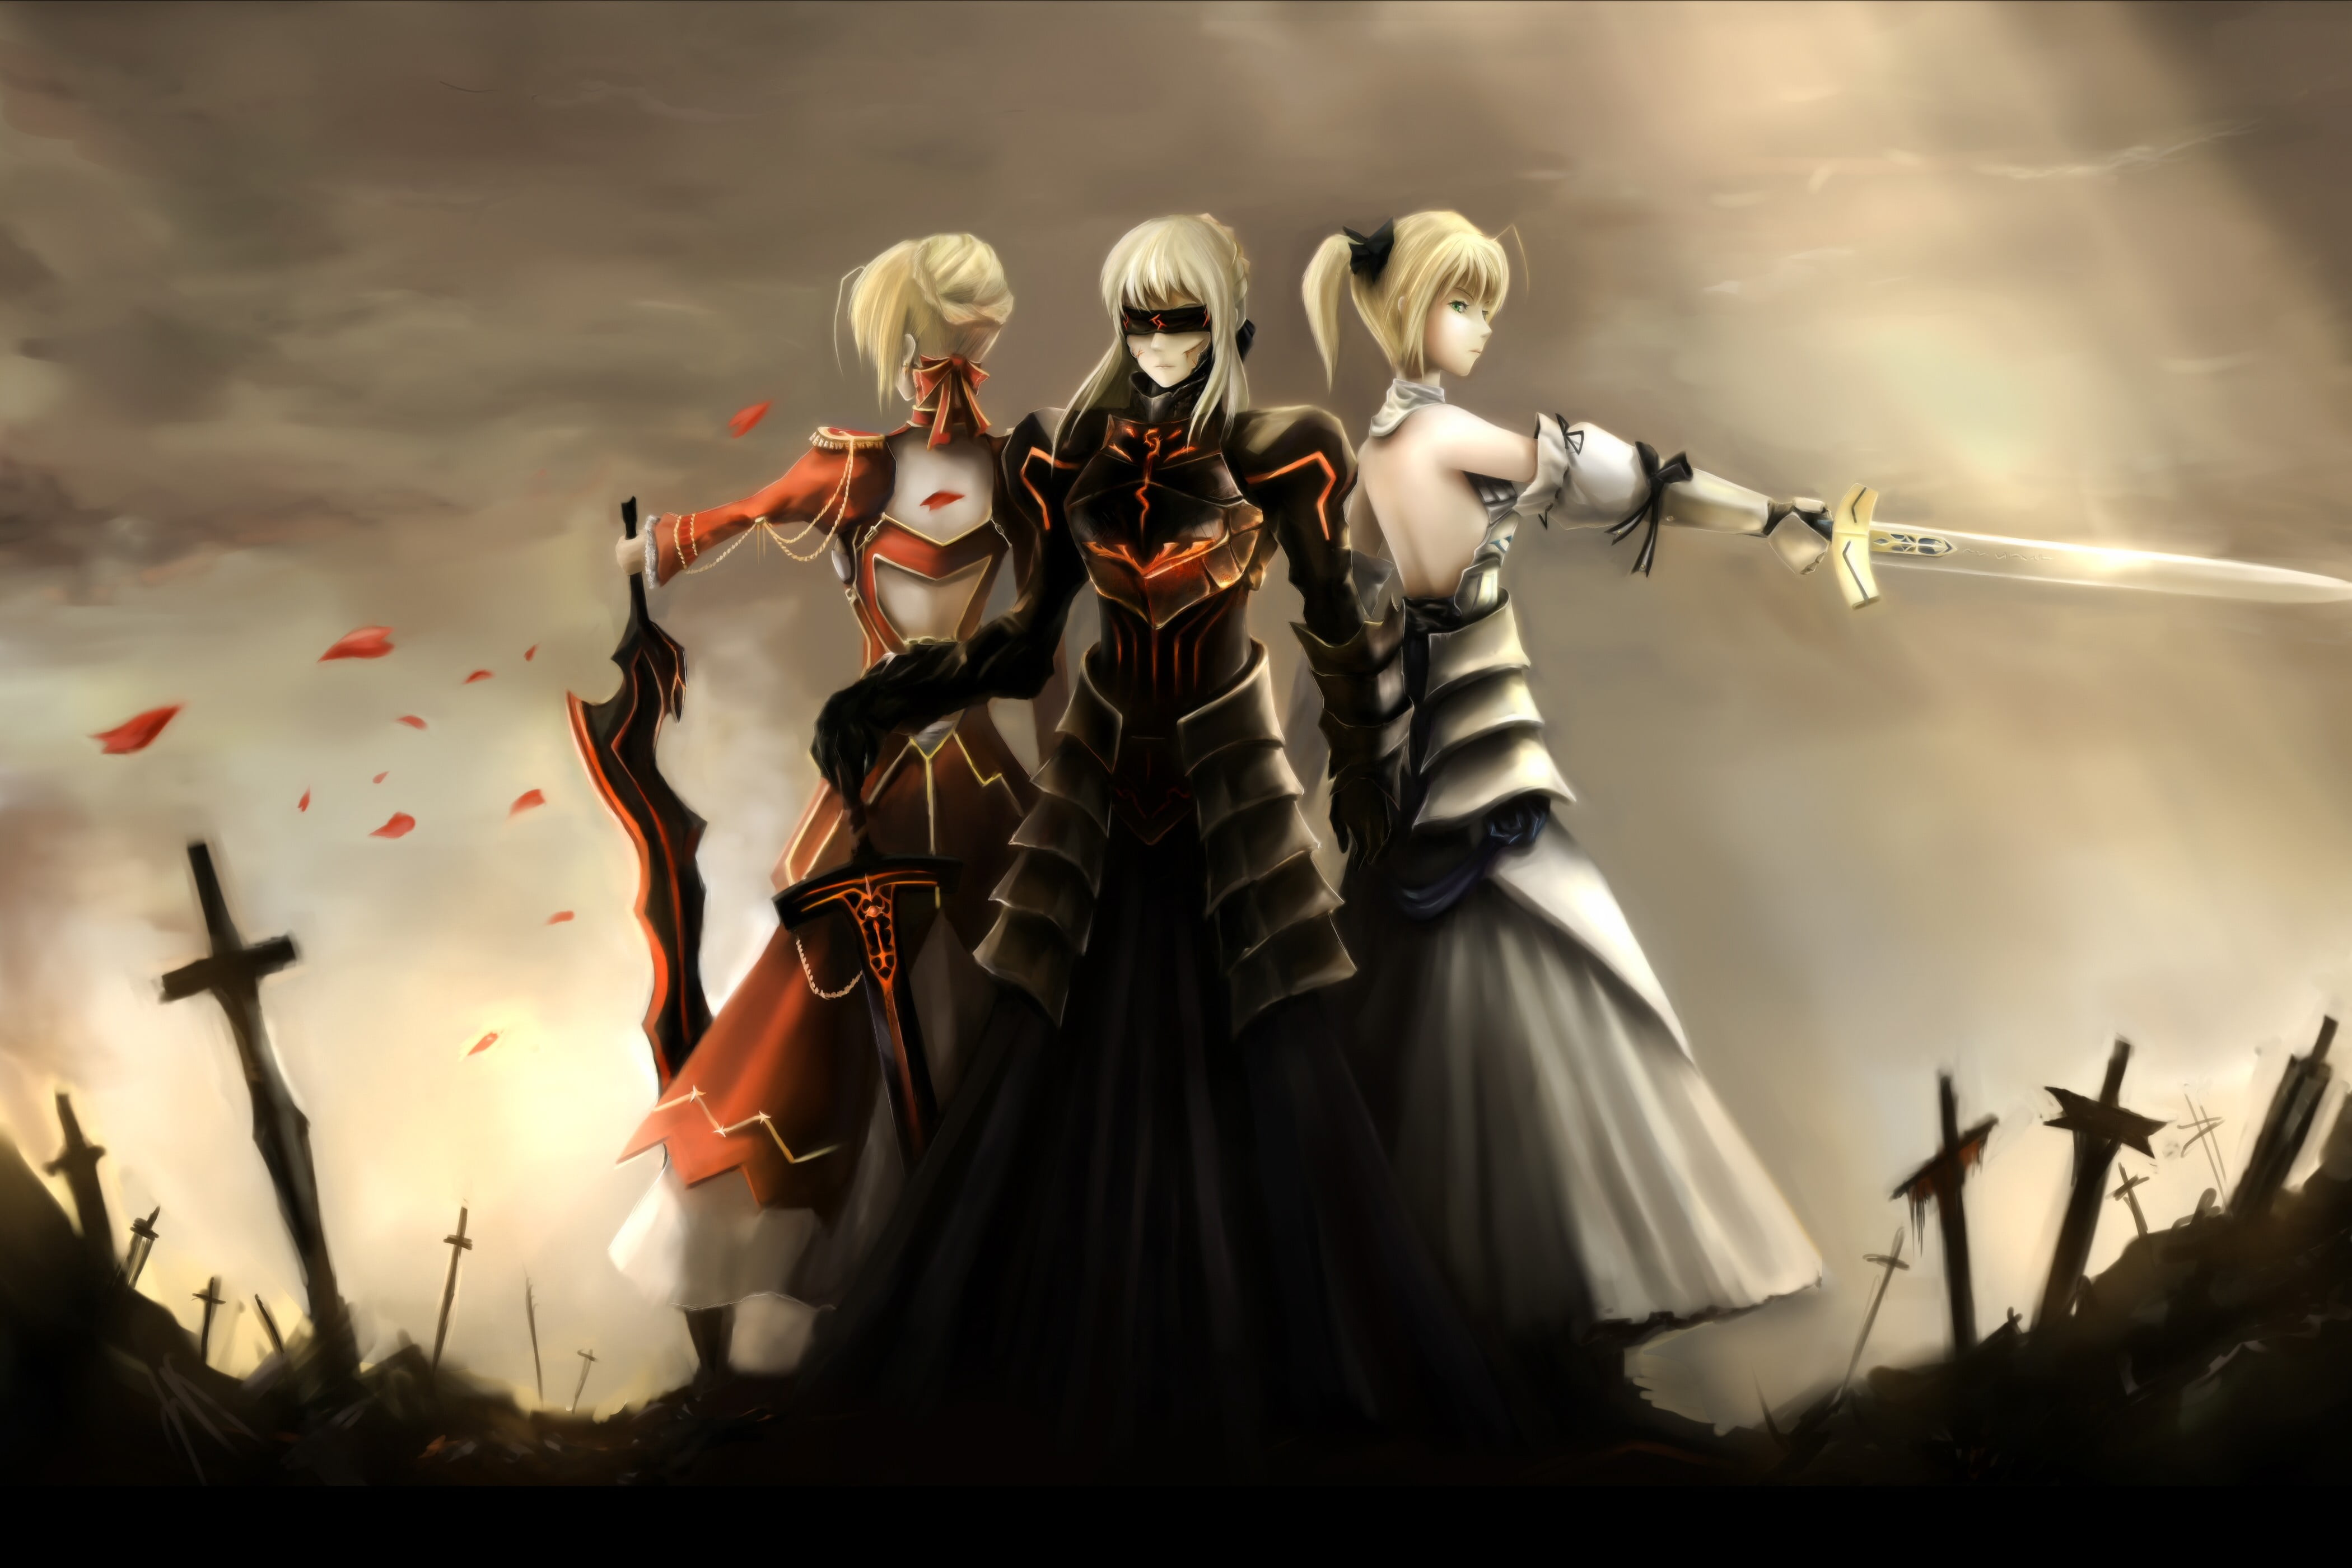 7. Saber (Fate/stay night) - wide 3